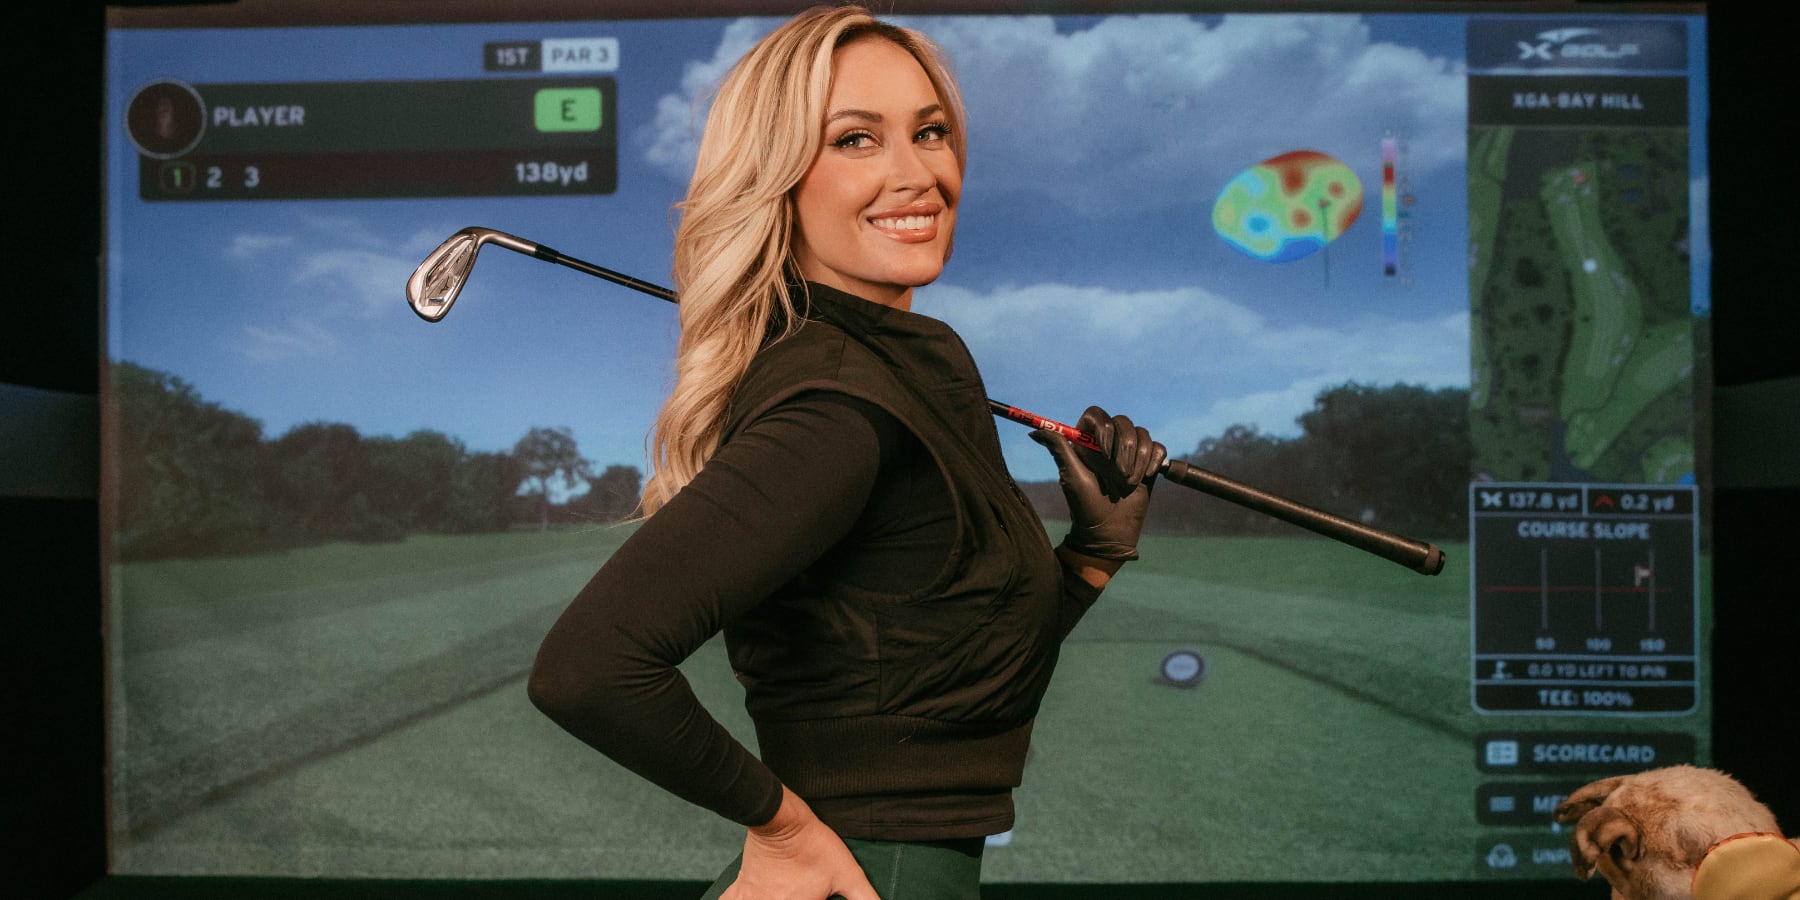 Golfer Paige Spiranac, smiling, stands in front of a golf simulator screen at X-Golf. She stands in profile facing the camera, with her club resting on her shoulder.